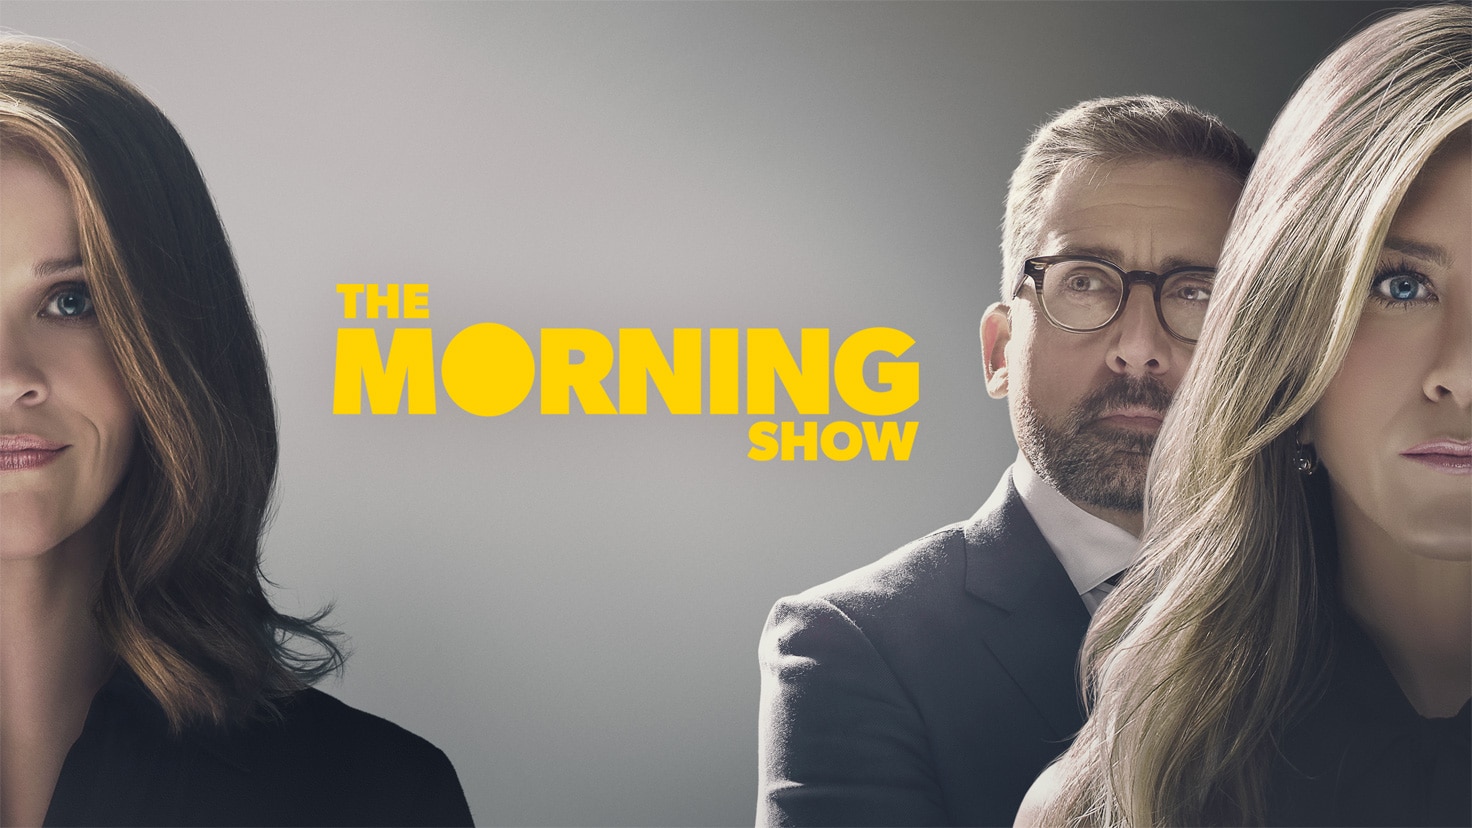 Filming for ‘The Morning Show‘ resumes in the middle of October.